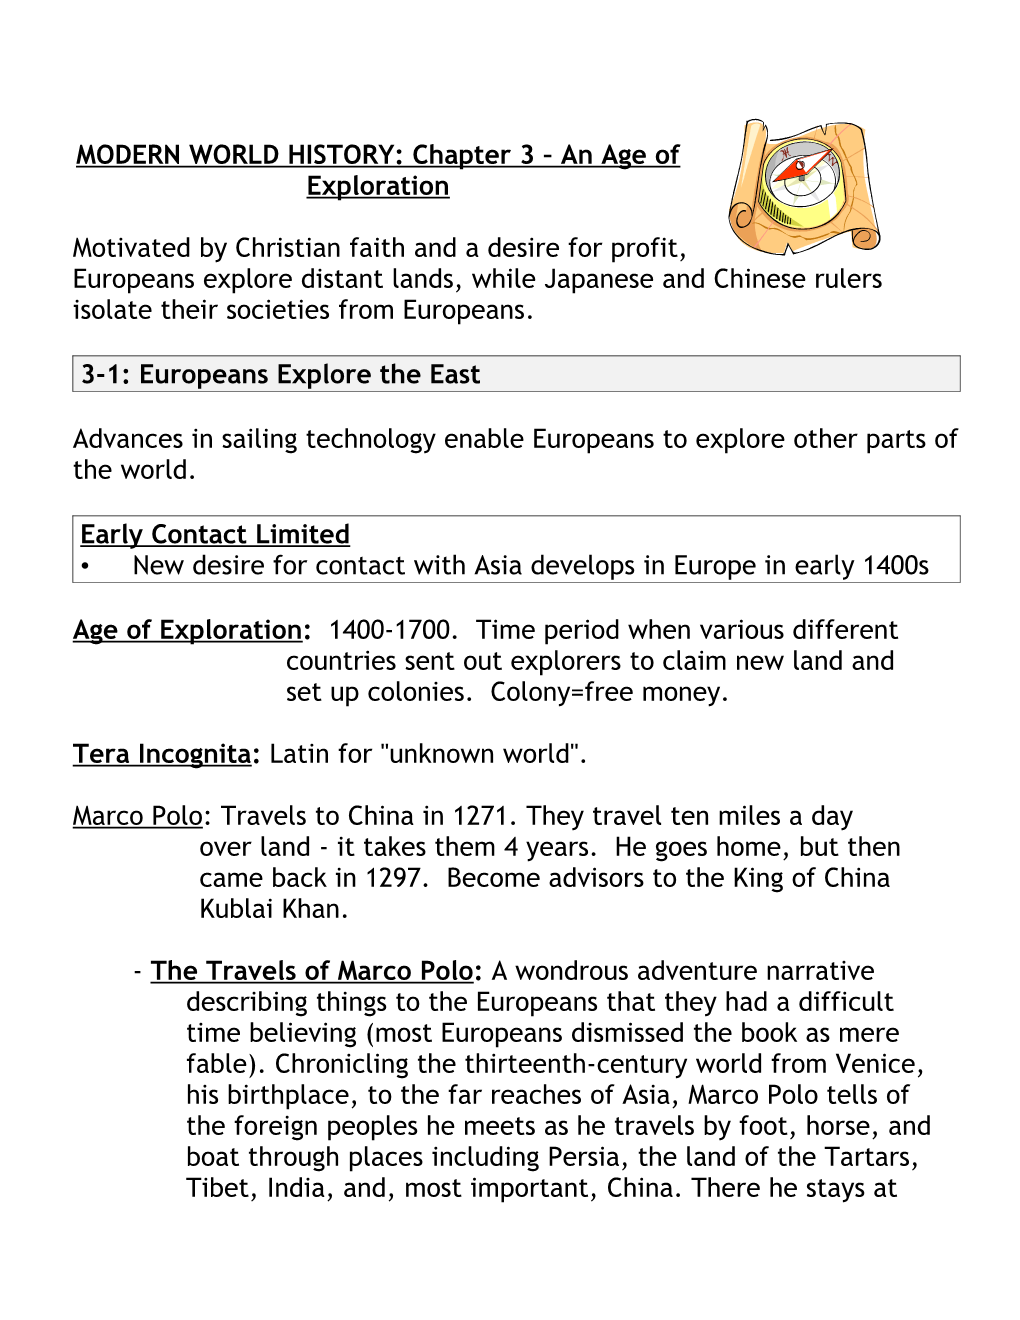 MODERN WORLD HISTORY: Chapter 3 an Age of Exploration